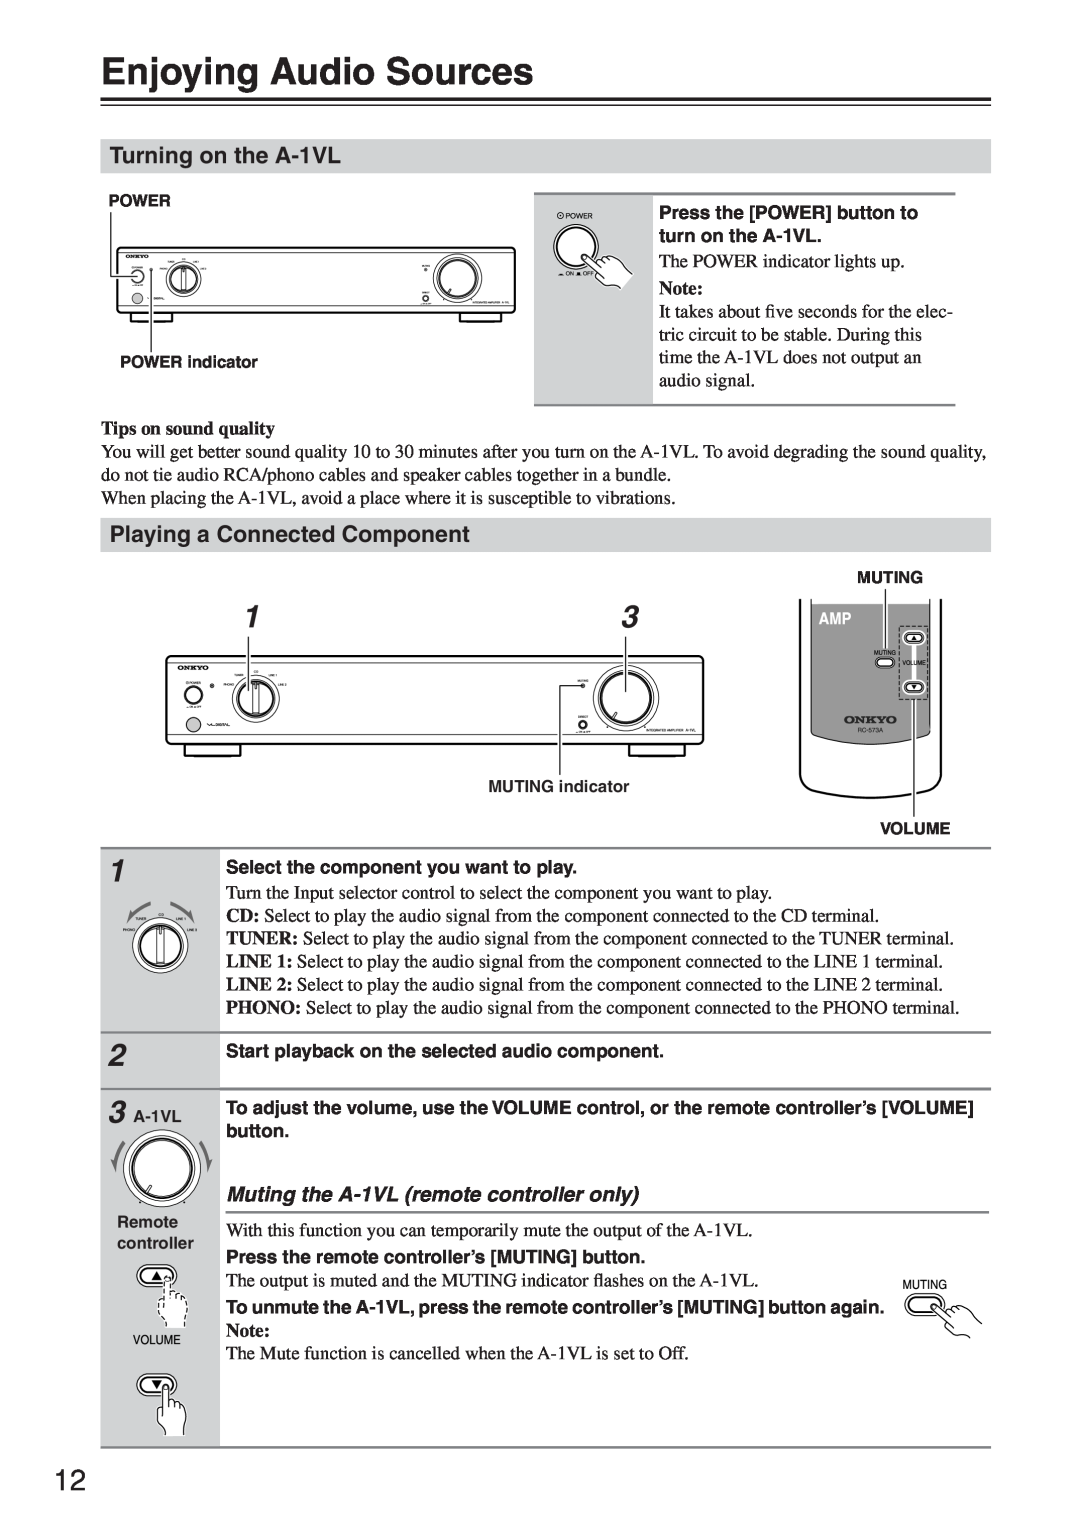 Onkyo instruction manual Enjoying Audio Sources, Turning on the A-1VL, Playing a Connected Component 